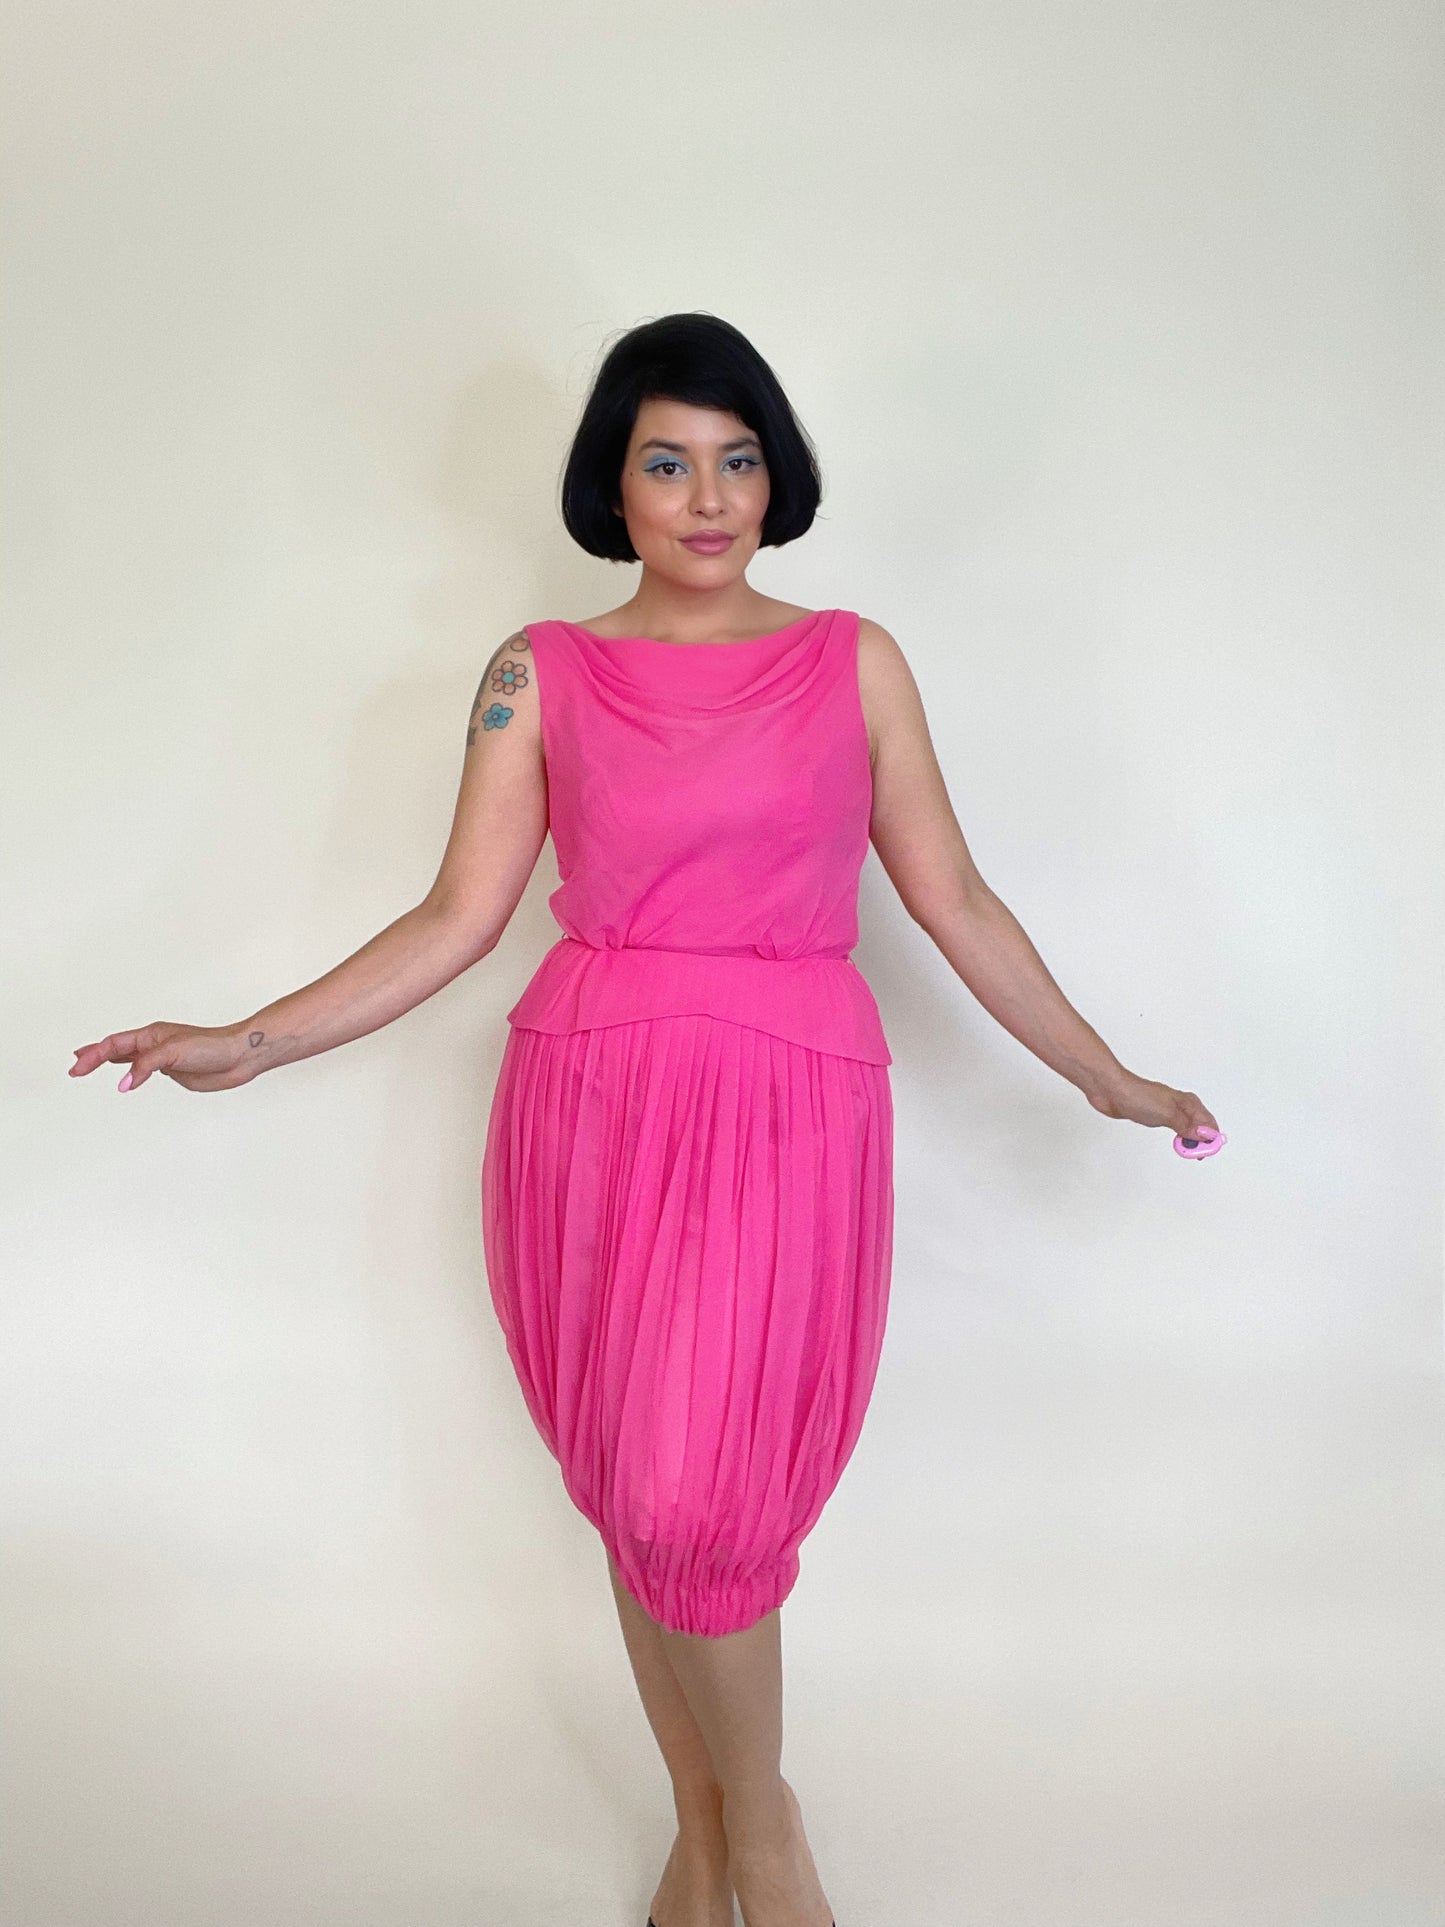 Vintage 60s Flamingo Pink Chiffon Dress with Bubble Hemline and Pleated Skirt Fits Sizes XS-S